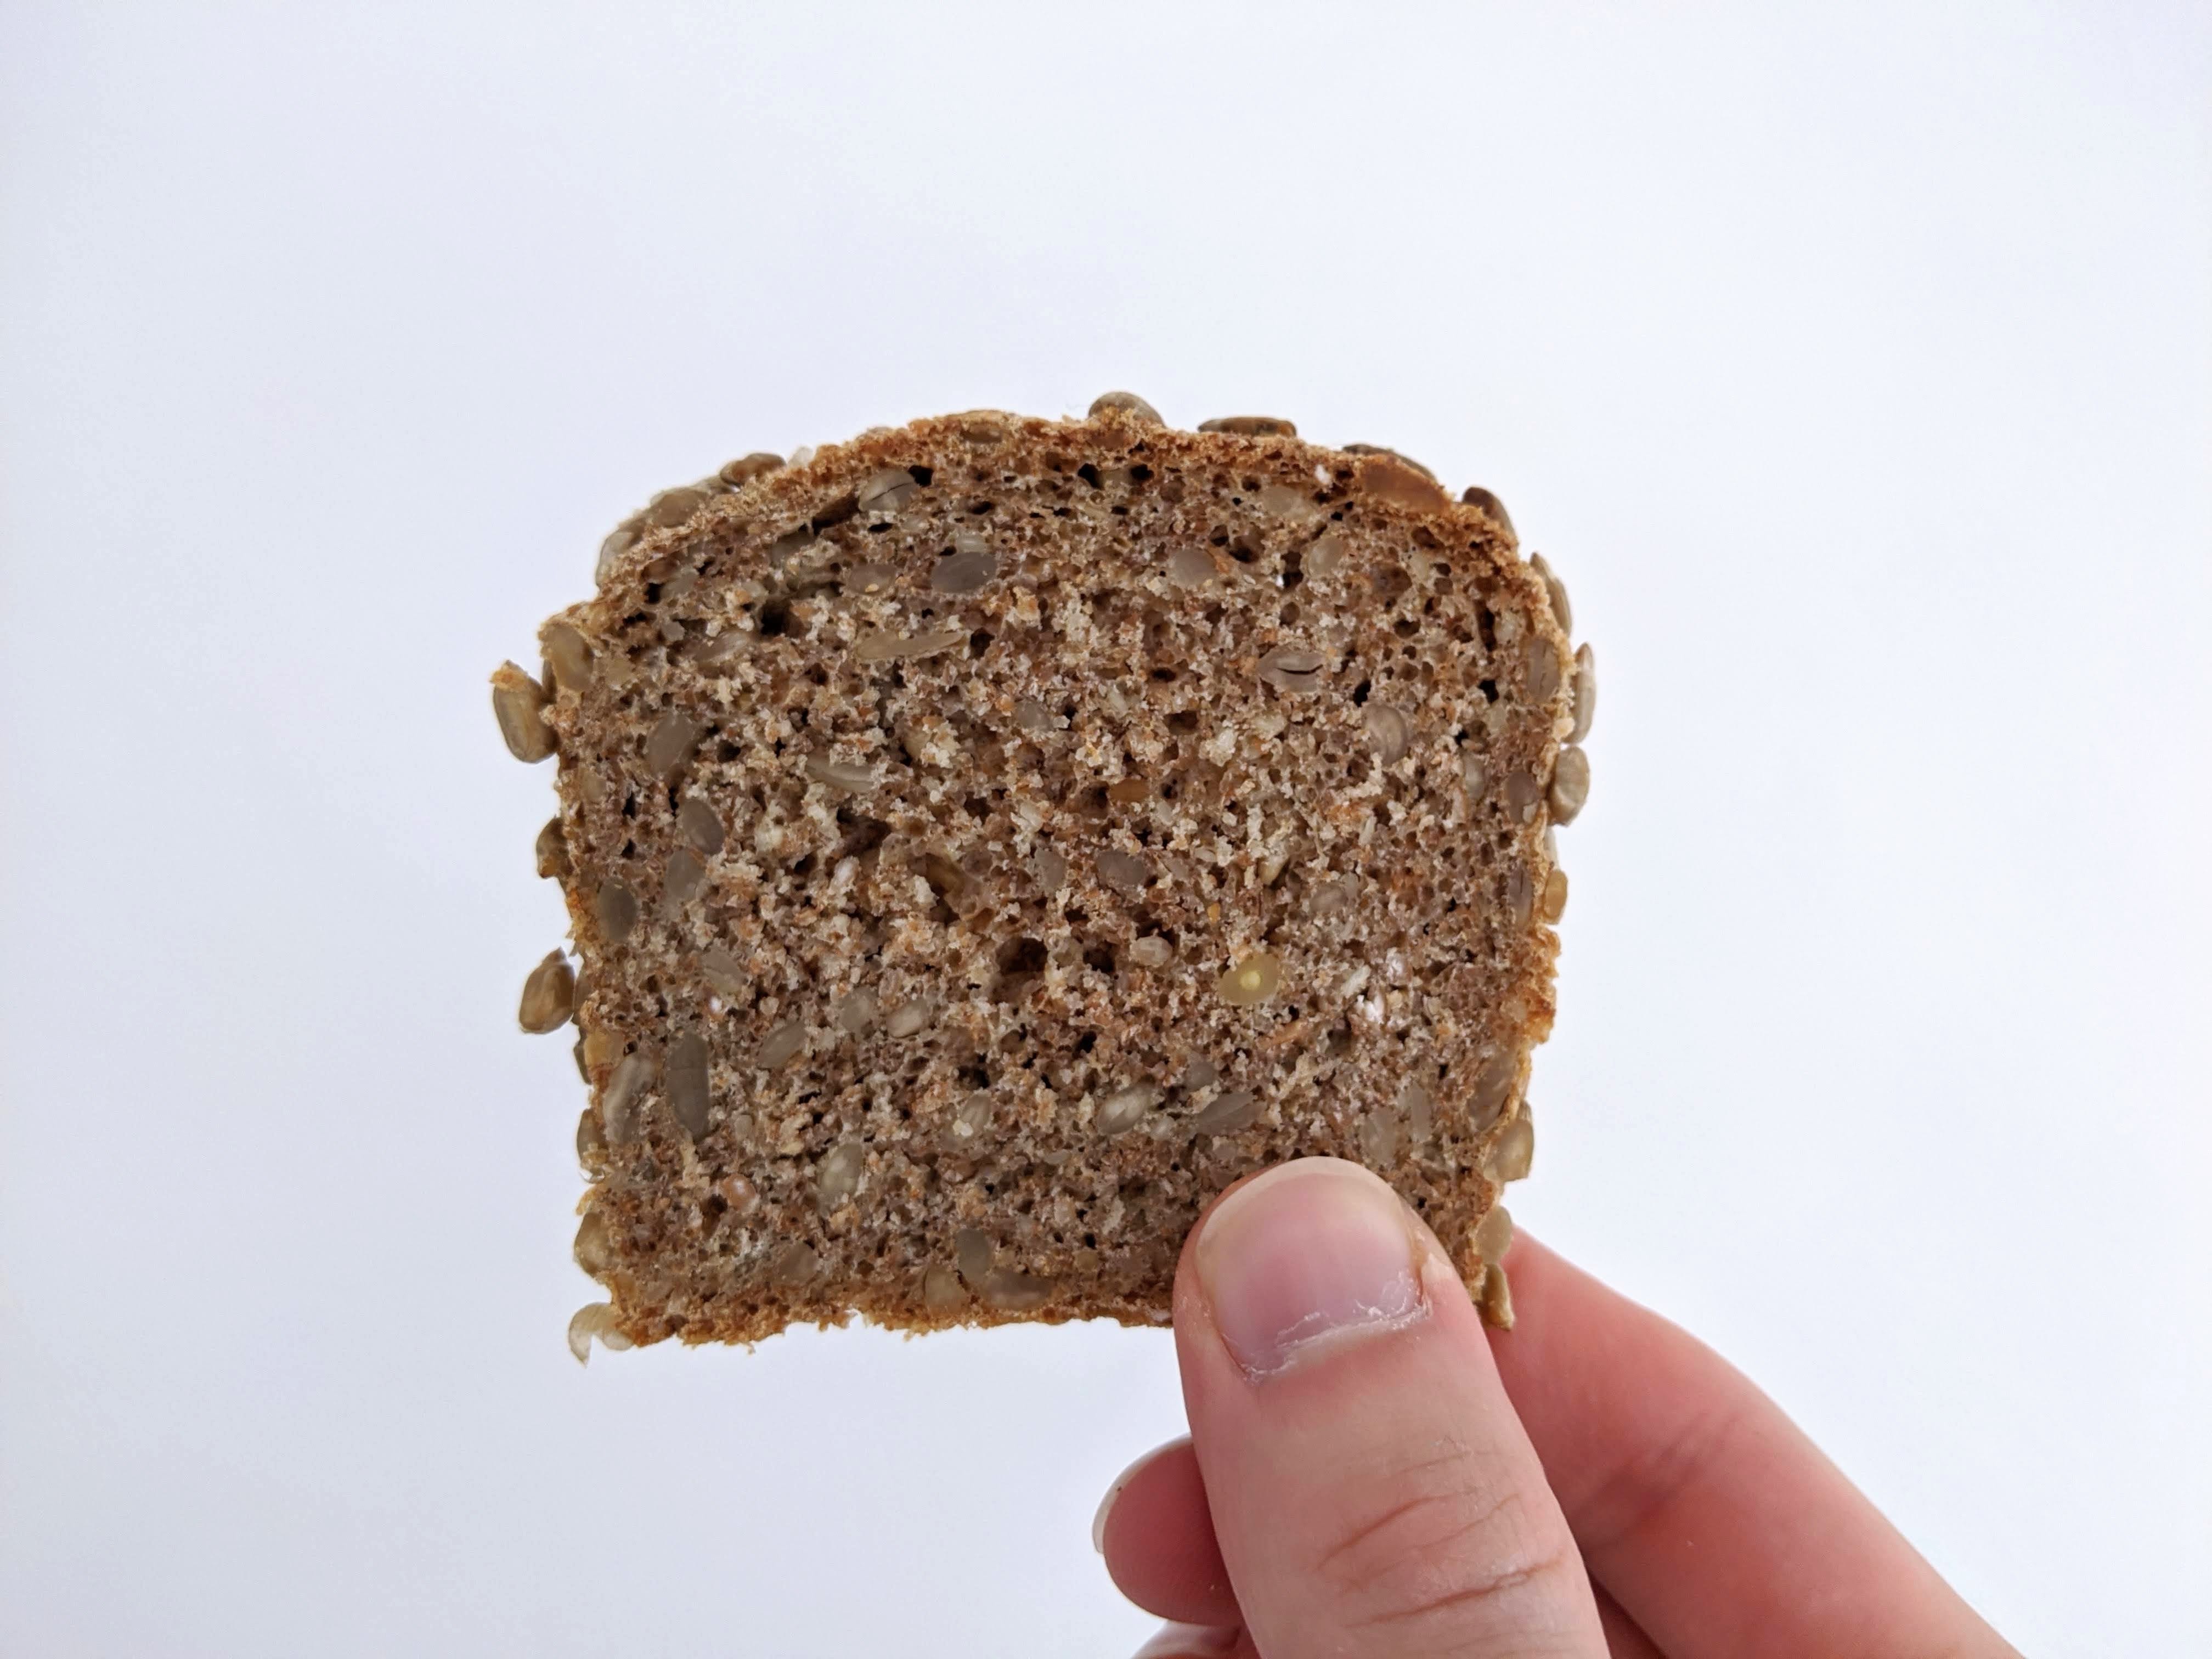 A slice of the bread